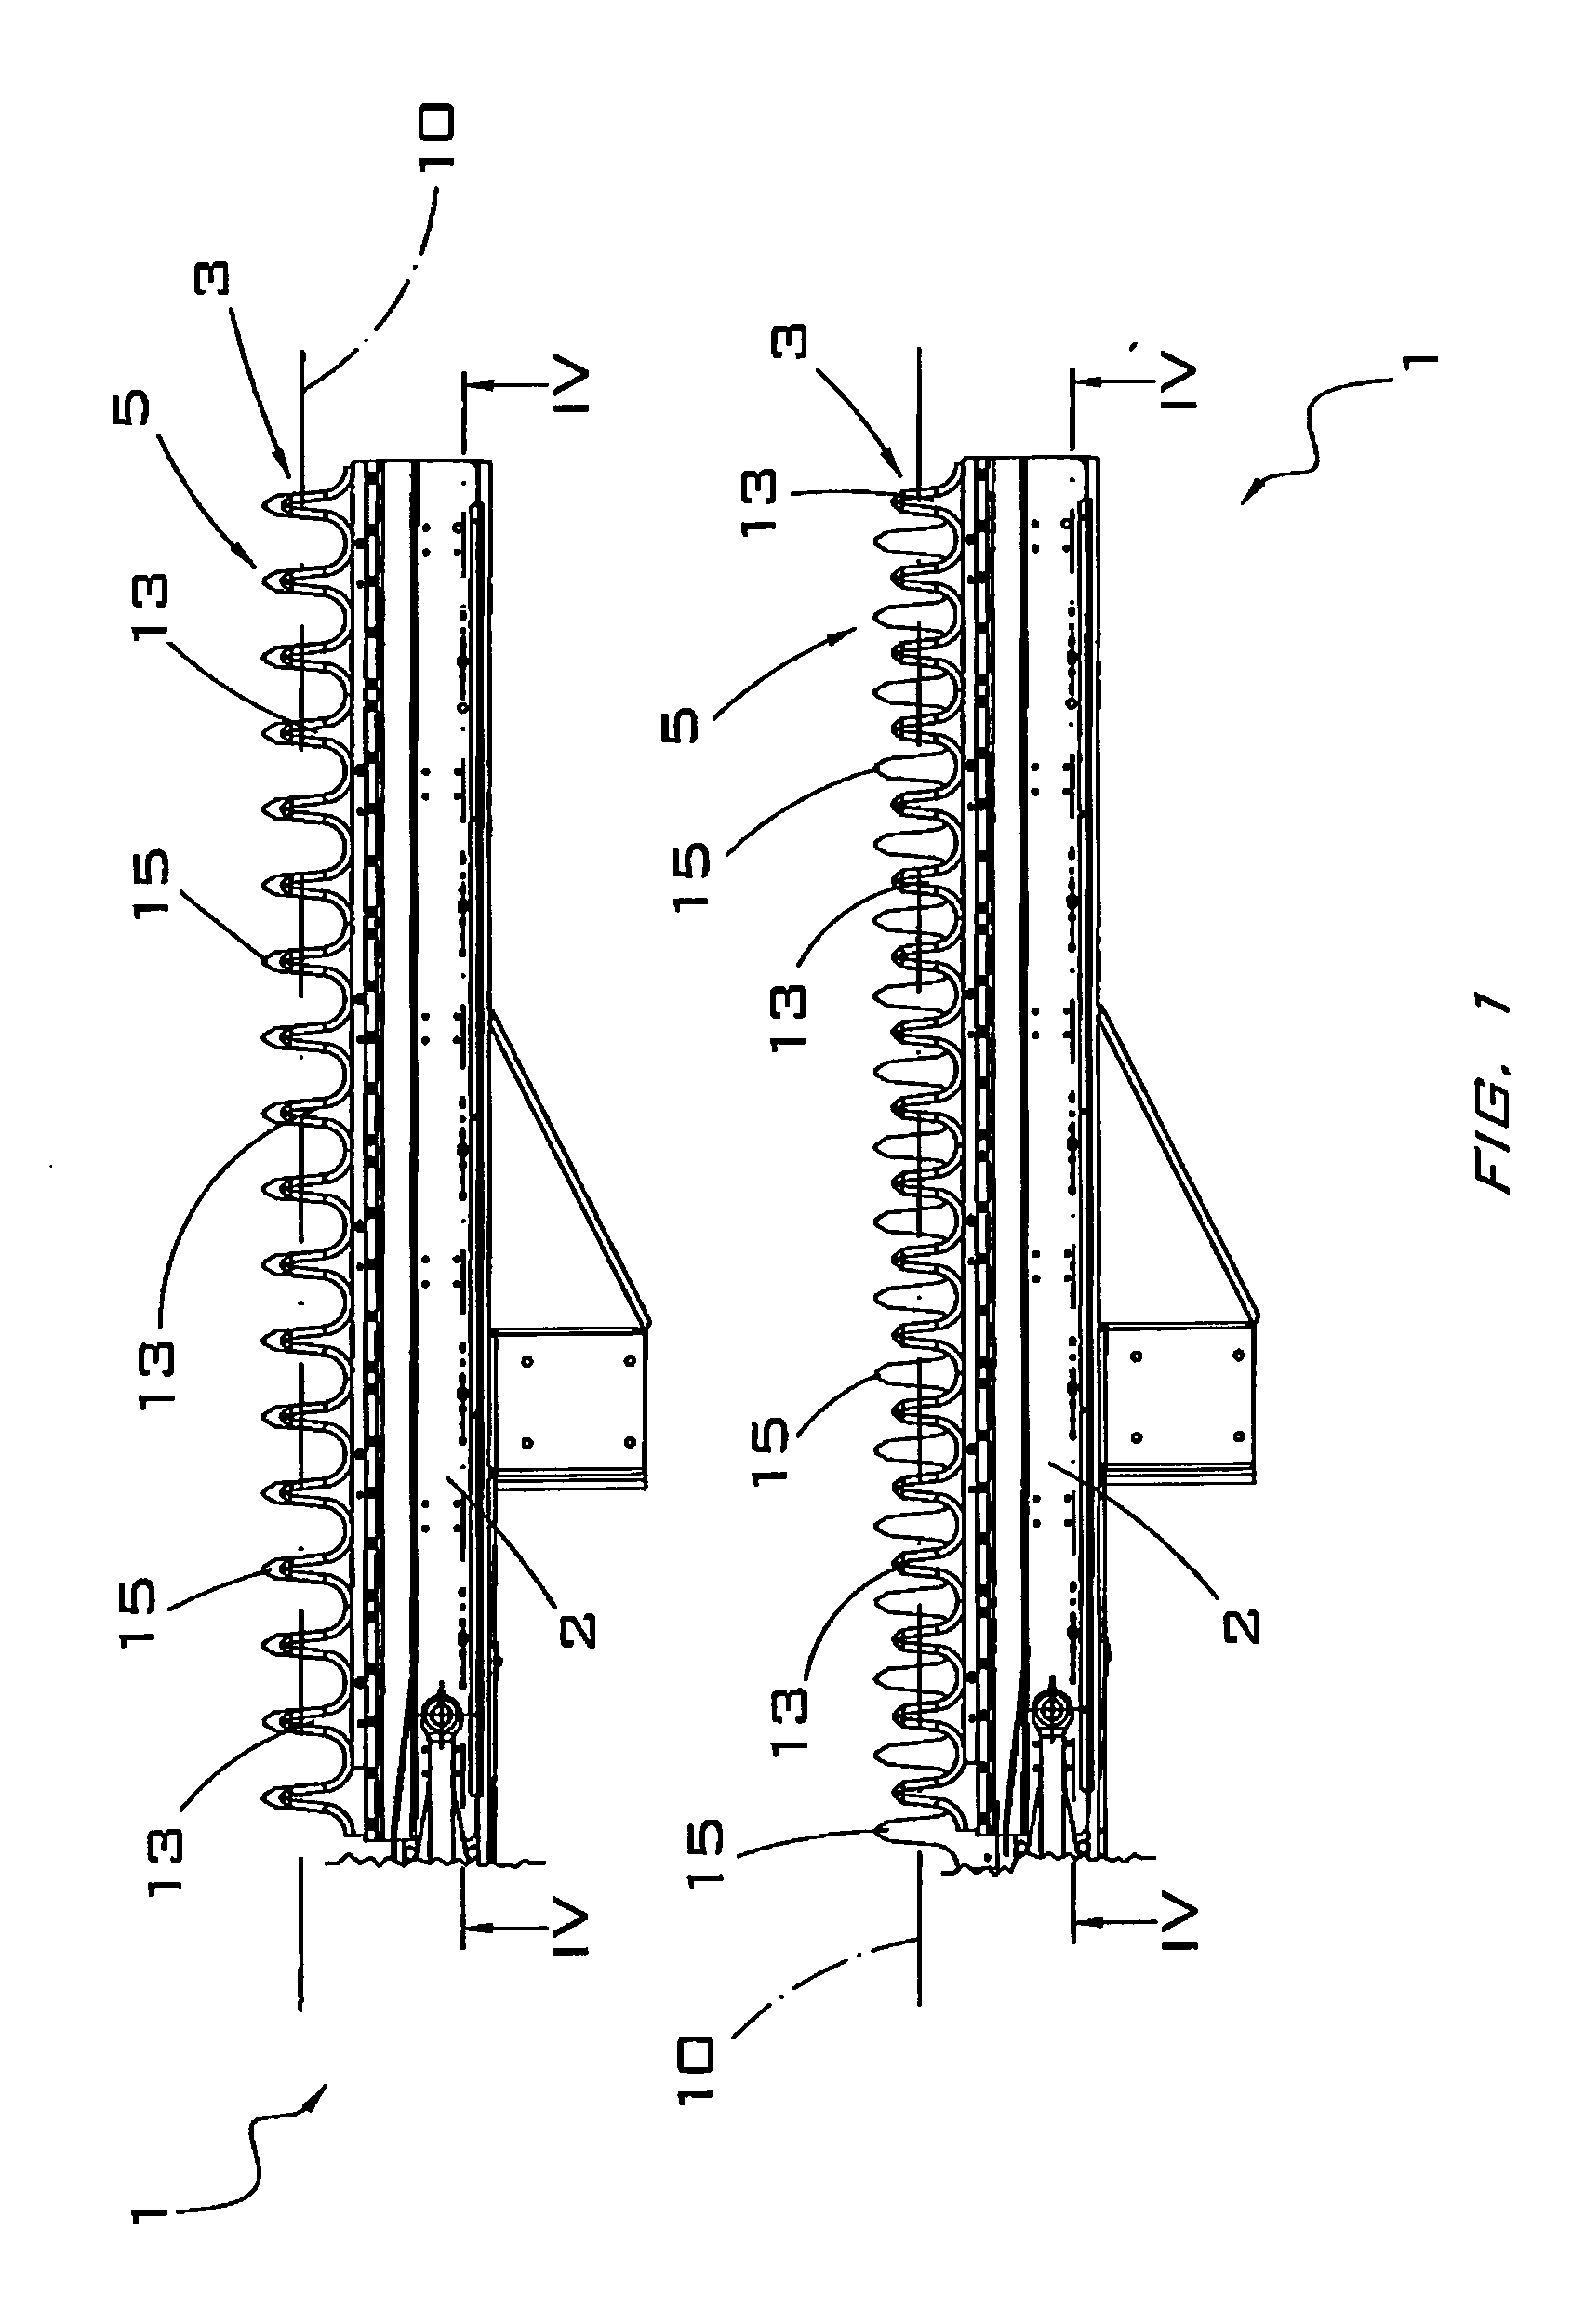 A double blade bar for pruning and pollarding, particularly for olive tree groves, citrus groves, hedges, timber trees and similar